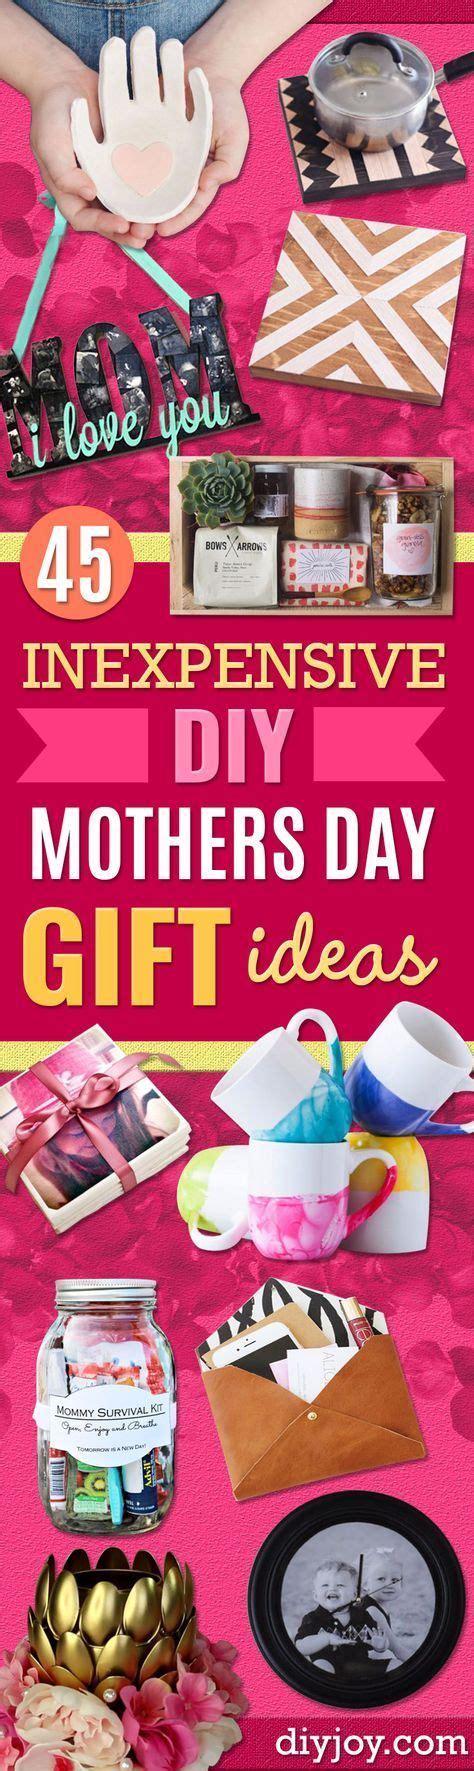 Create your own personal love story book. DIY Mothers Day Gift Ideas - Homemade Gifts for Moms - Crafts and Do It Yourself Home De ...